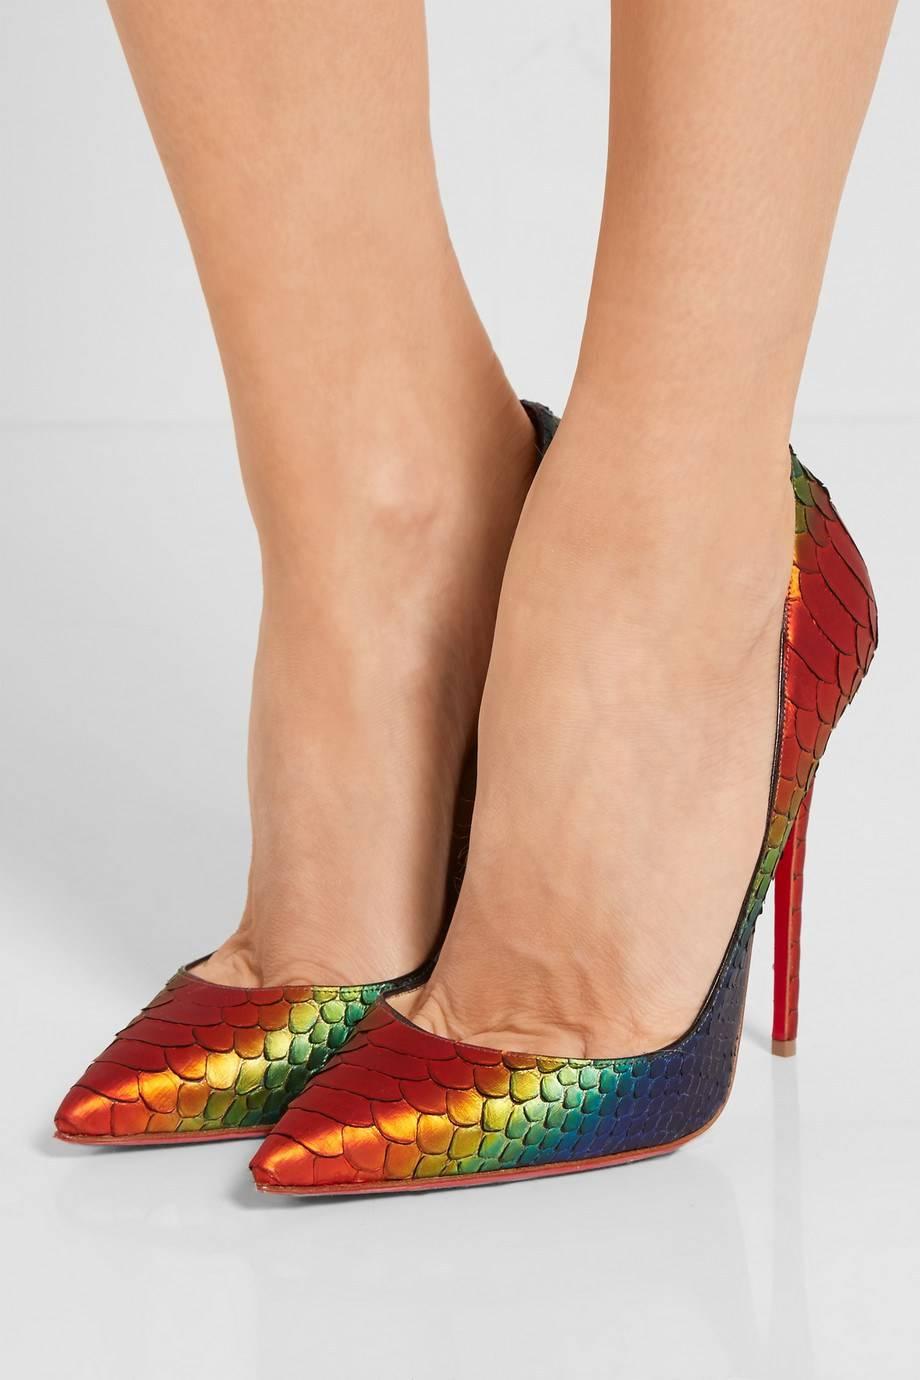 CURATOR'S NOTES

Christian Louboutin New & Sold Out Python So Kate Heels Pumps in Box  

Size IT 36.5
Python snakeskin
Slip on 
Made in Italy
Heel height 4.75"
Includes original Christian Louboutin dust bag and box